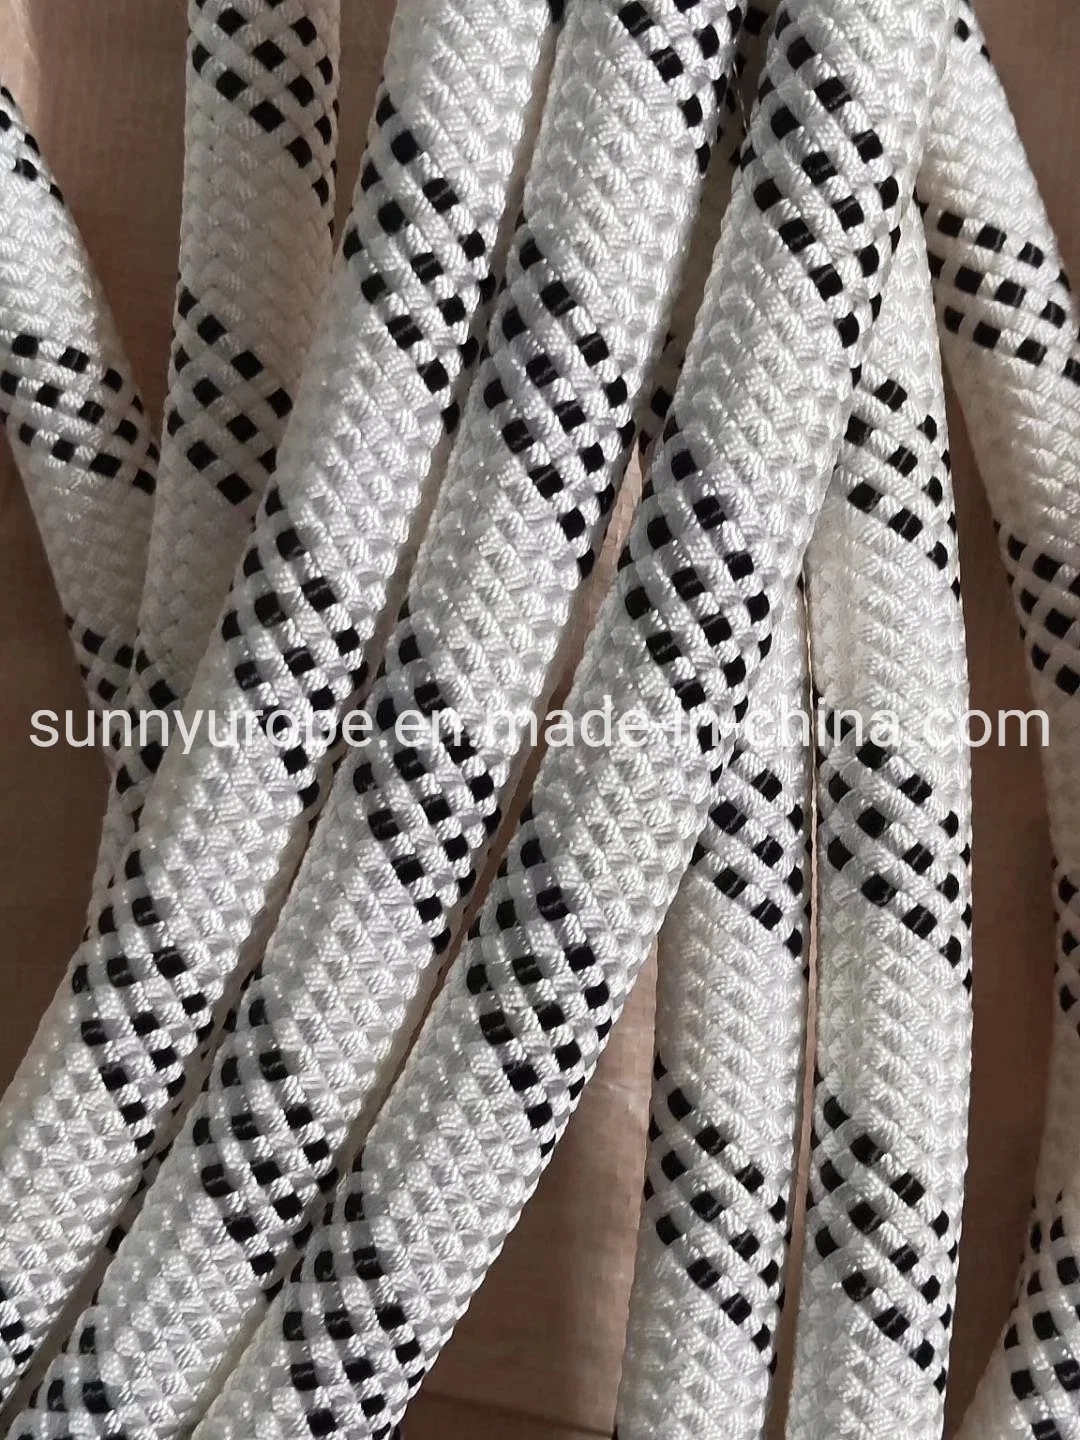 32 24 Strand Double Braided Rope High quality/High cost performance  Safety